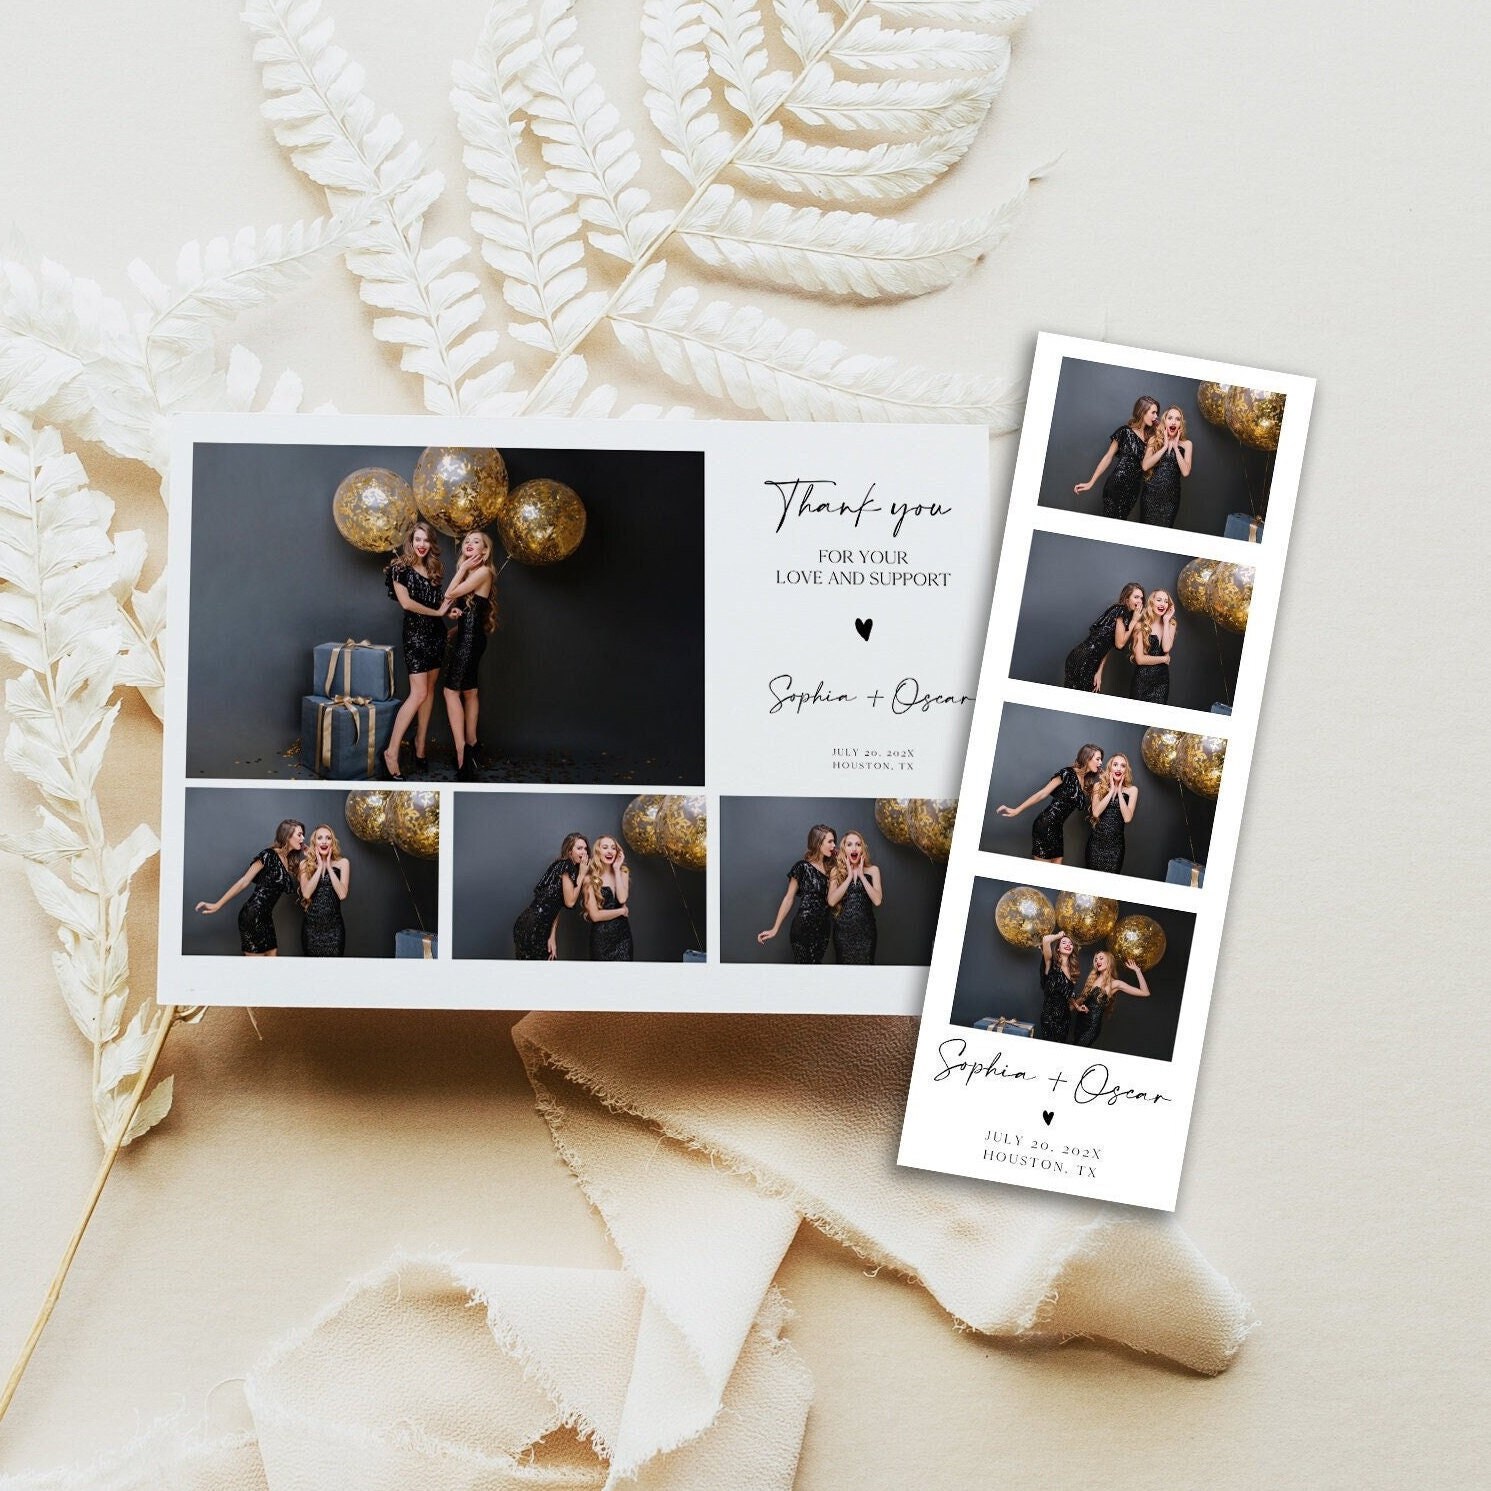  Photo Booth Photo Album For Photobooth Strips - Party Or  Wedding Favors - 20 Clear Sleeves - Fits 40 Slide In Photos Photobooth -  Pack of 5 or 10 (PACK OF 10, MINT) : Home & Kitchen